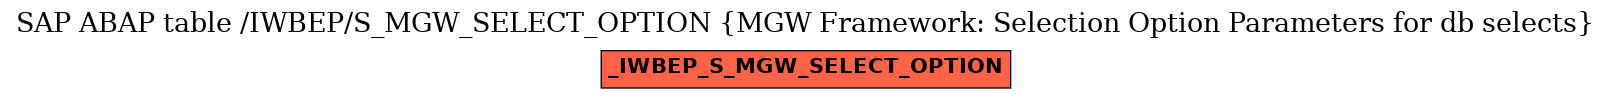 E-R Diagram for table /IWBEP/S_MGW_SELECT_OPTION (MGW Framework: Selection Option Parameters for db selects)